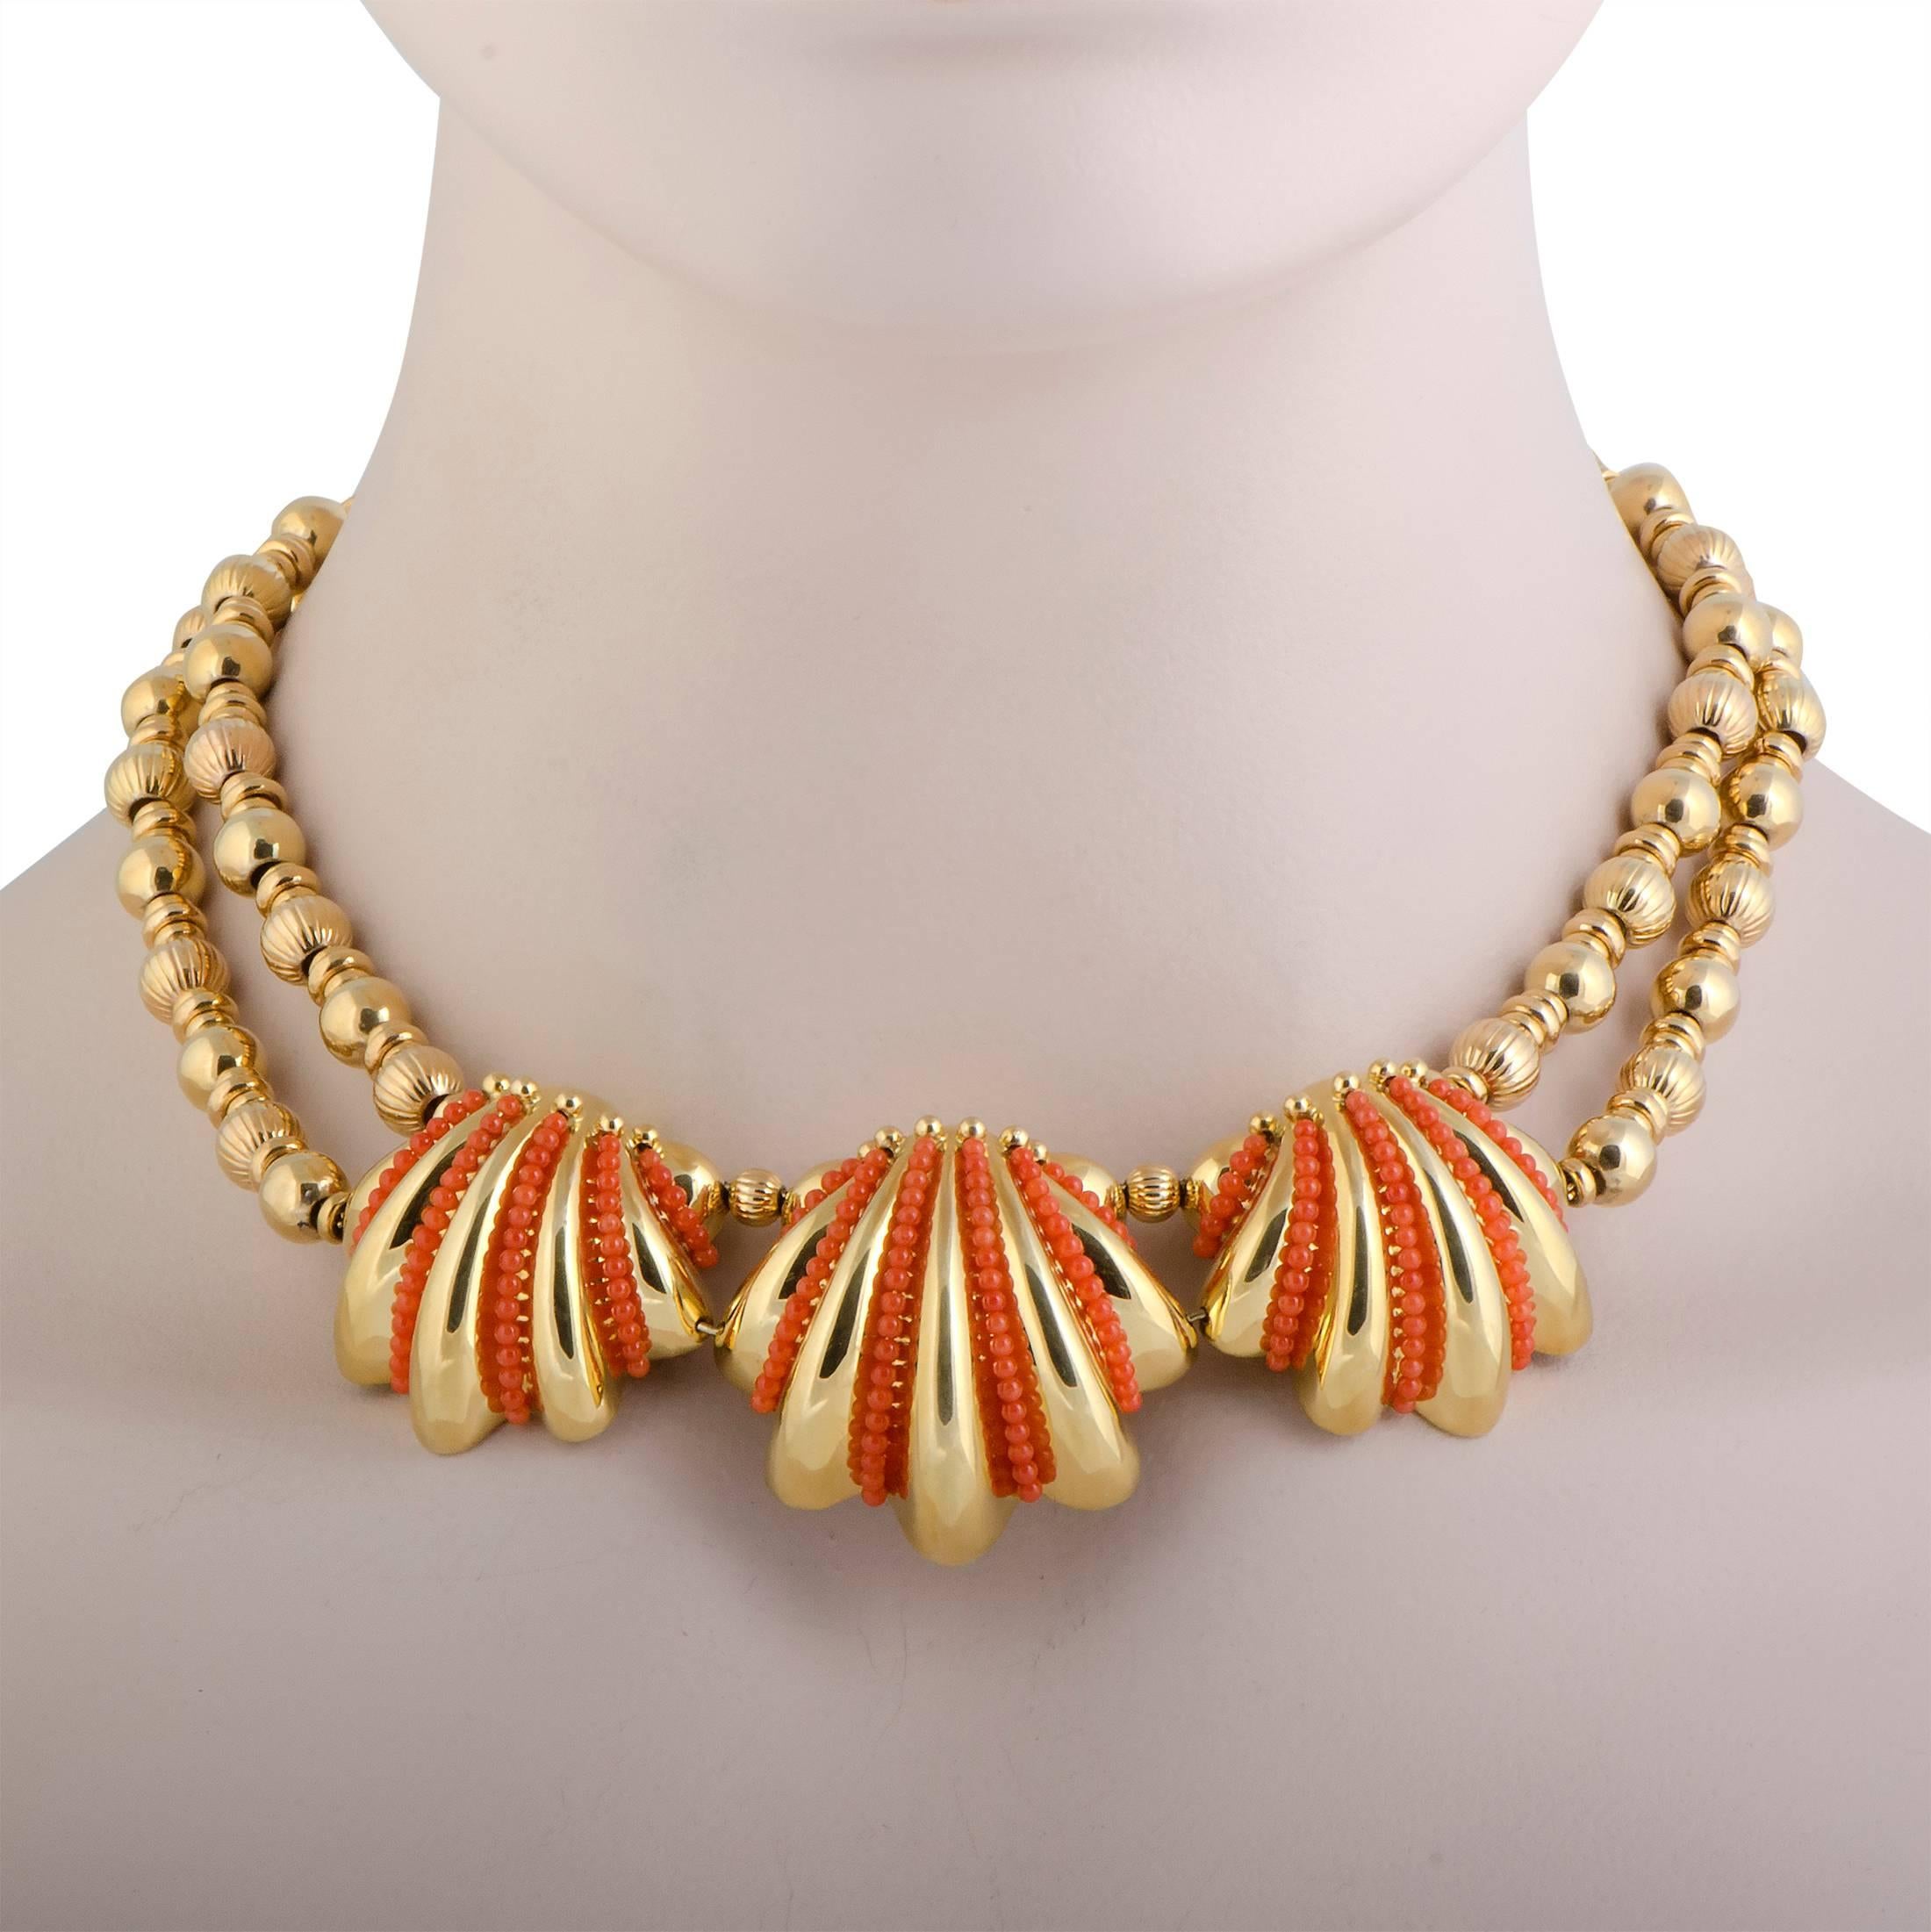 This glamorous necklace, attractively designed by Rossetti in 18K yellow gold, features a unique and alluring style. The extraordinary necklace includes coral embellishments in its incredible design that accentuate the charming appeal of the stylish